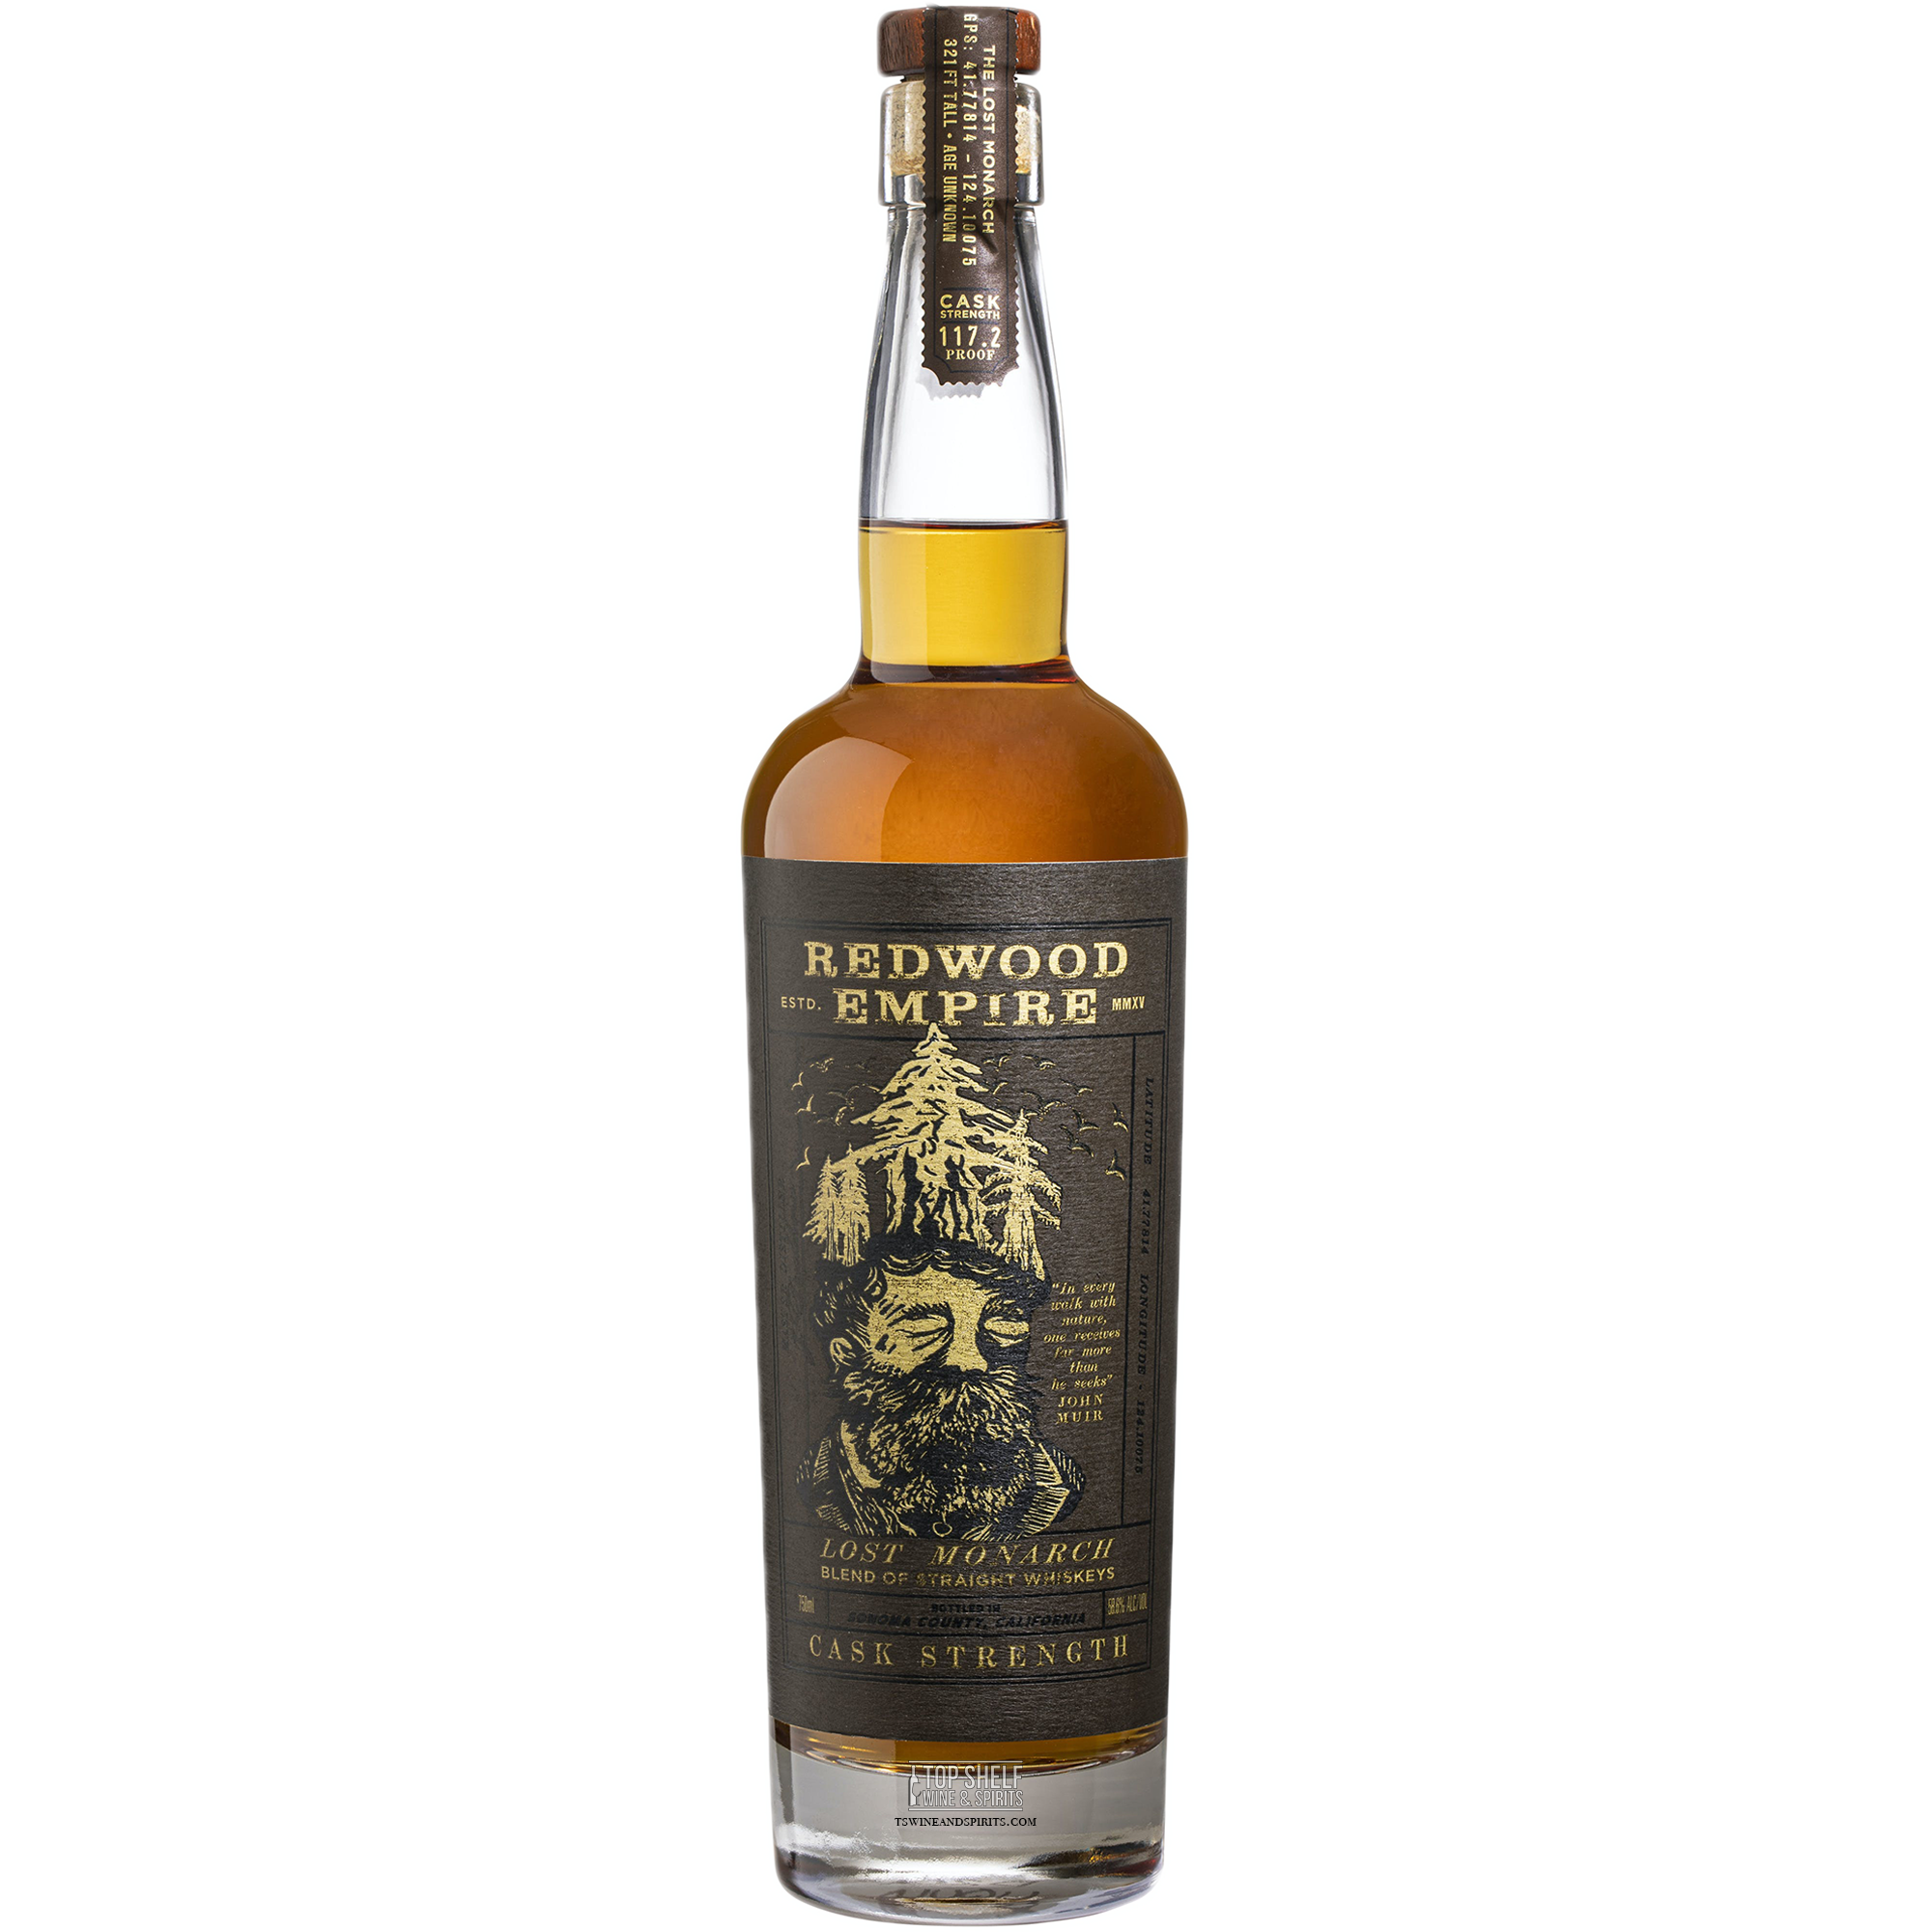 Redwood Empire "Lost Monarch" Cask Strength Blended Whiskey